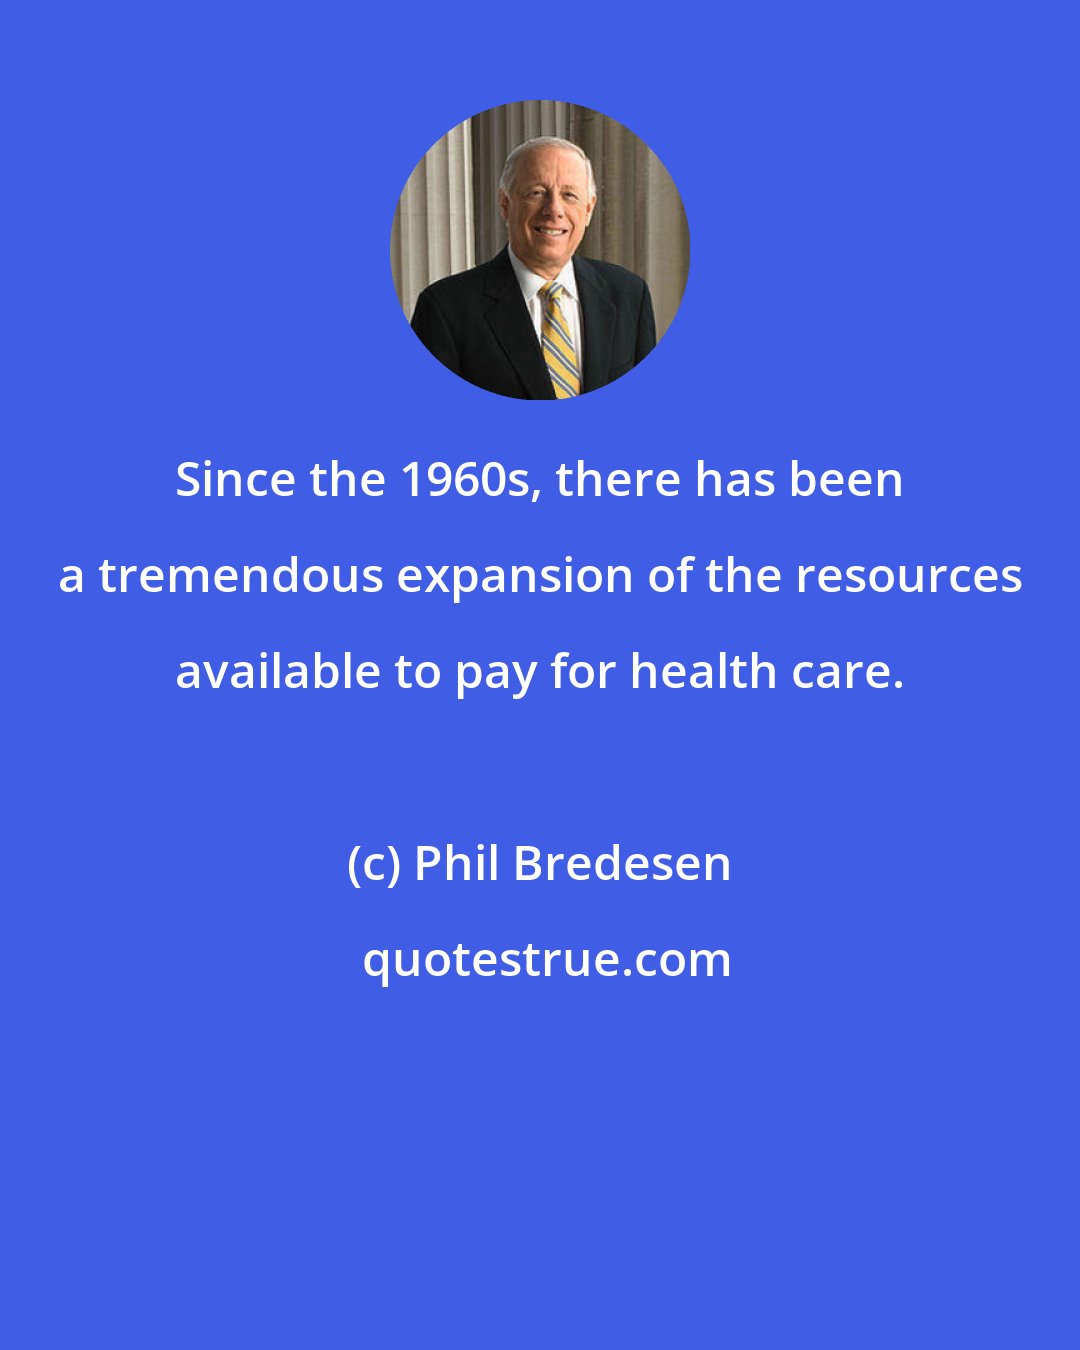 Phil Bredesen: Since the 1960s, there has been a tremendous expansion of the resources available to pay for health care.